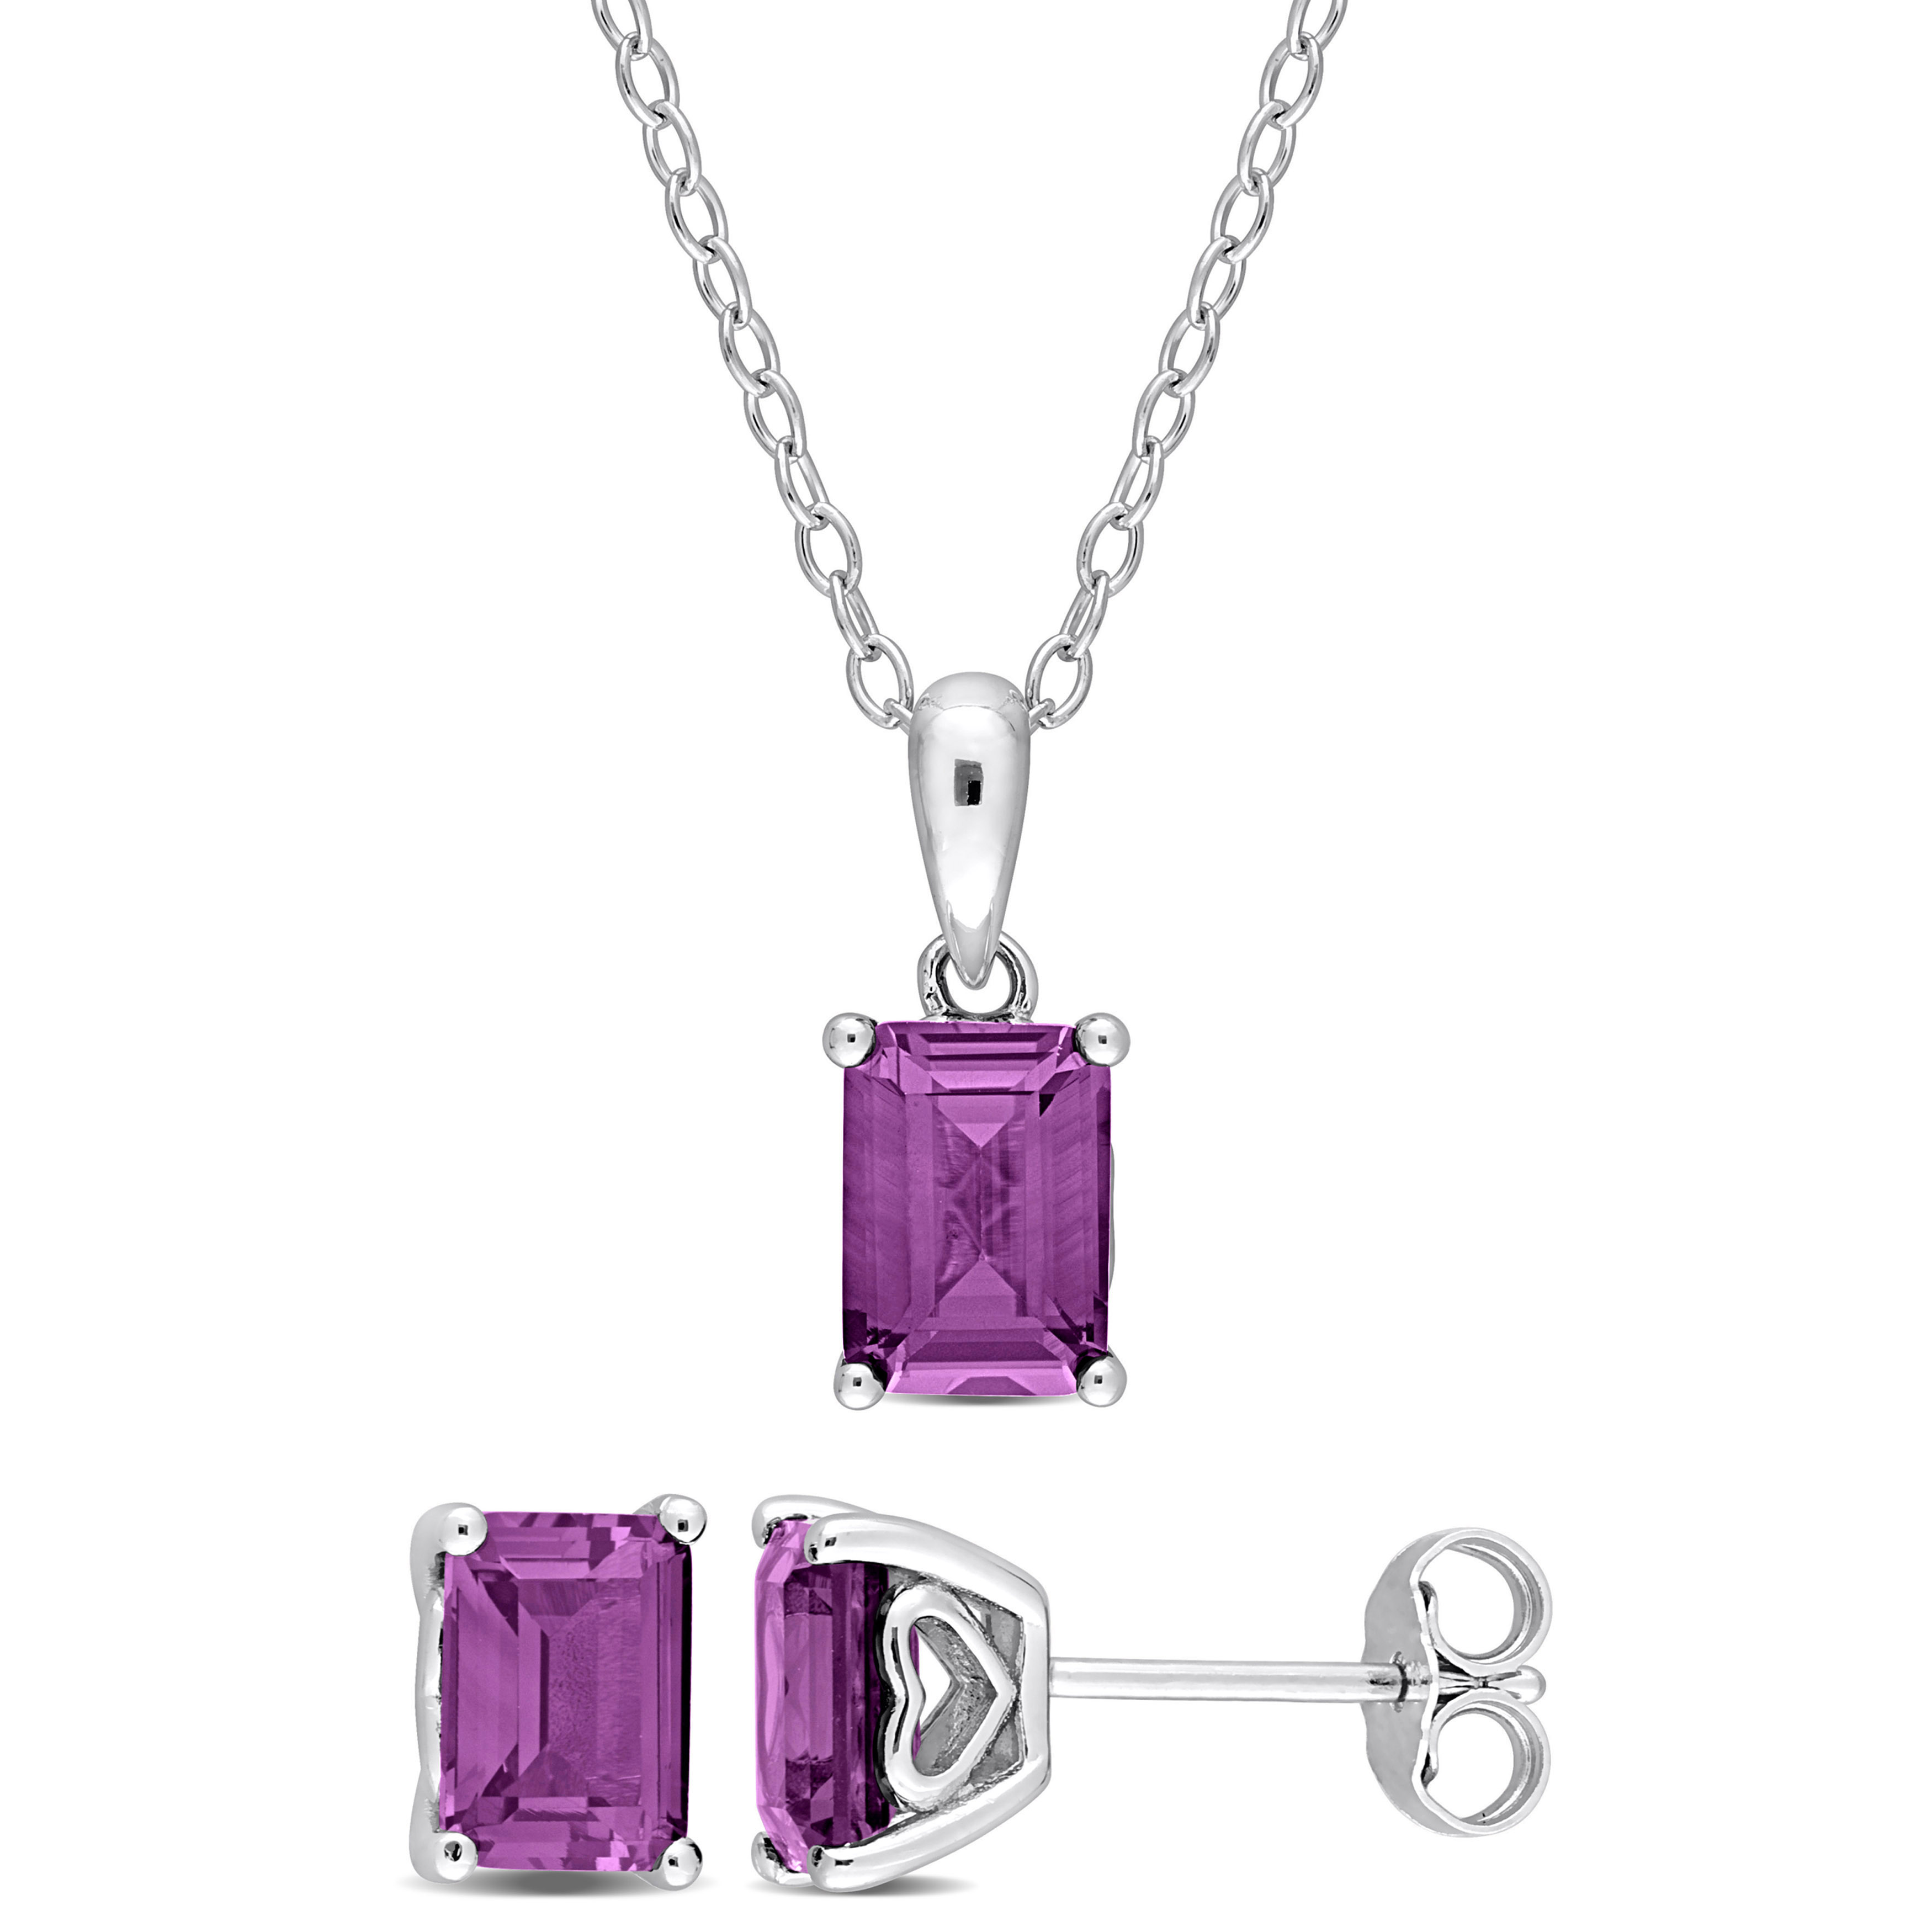 4 1/2 CT TGW Octagon Simulated Alexandrite Set With Chain in Sterling Silver